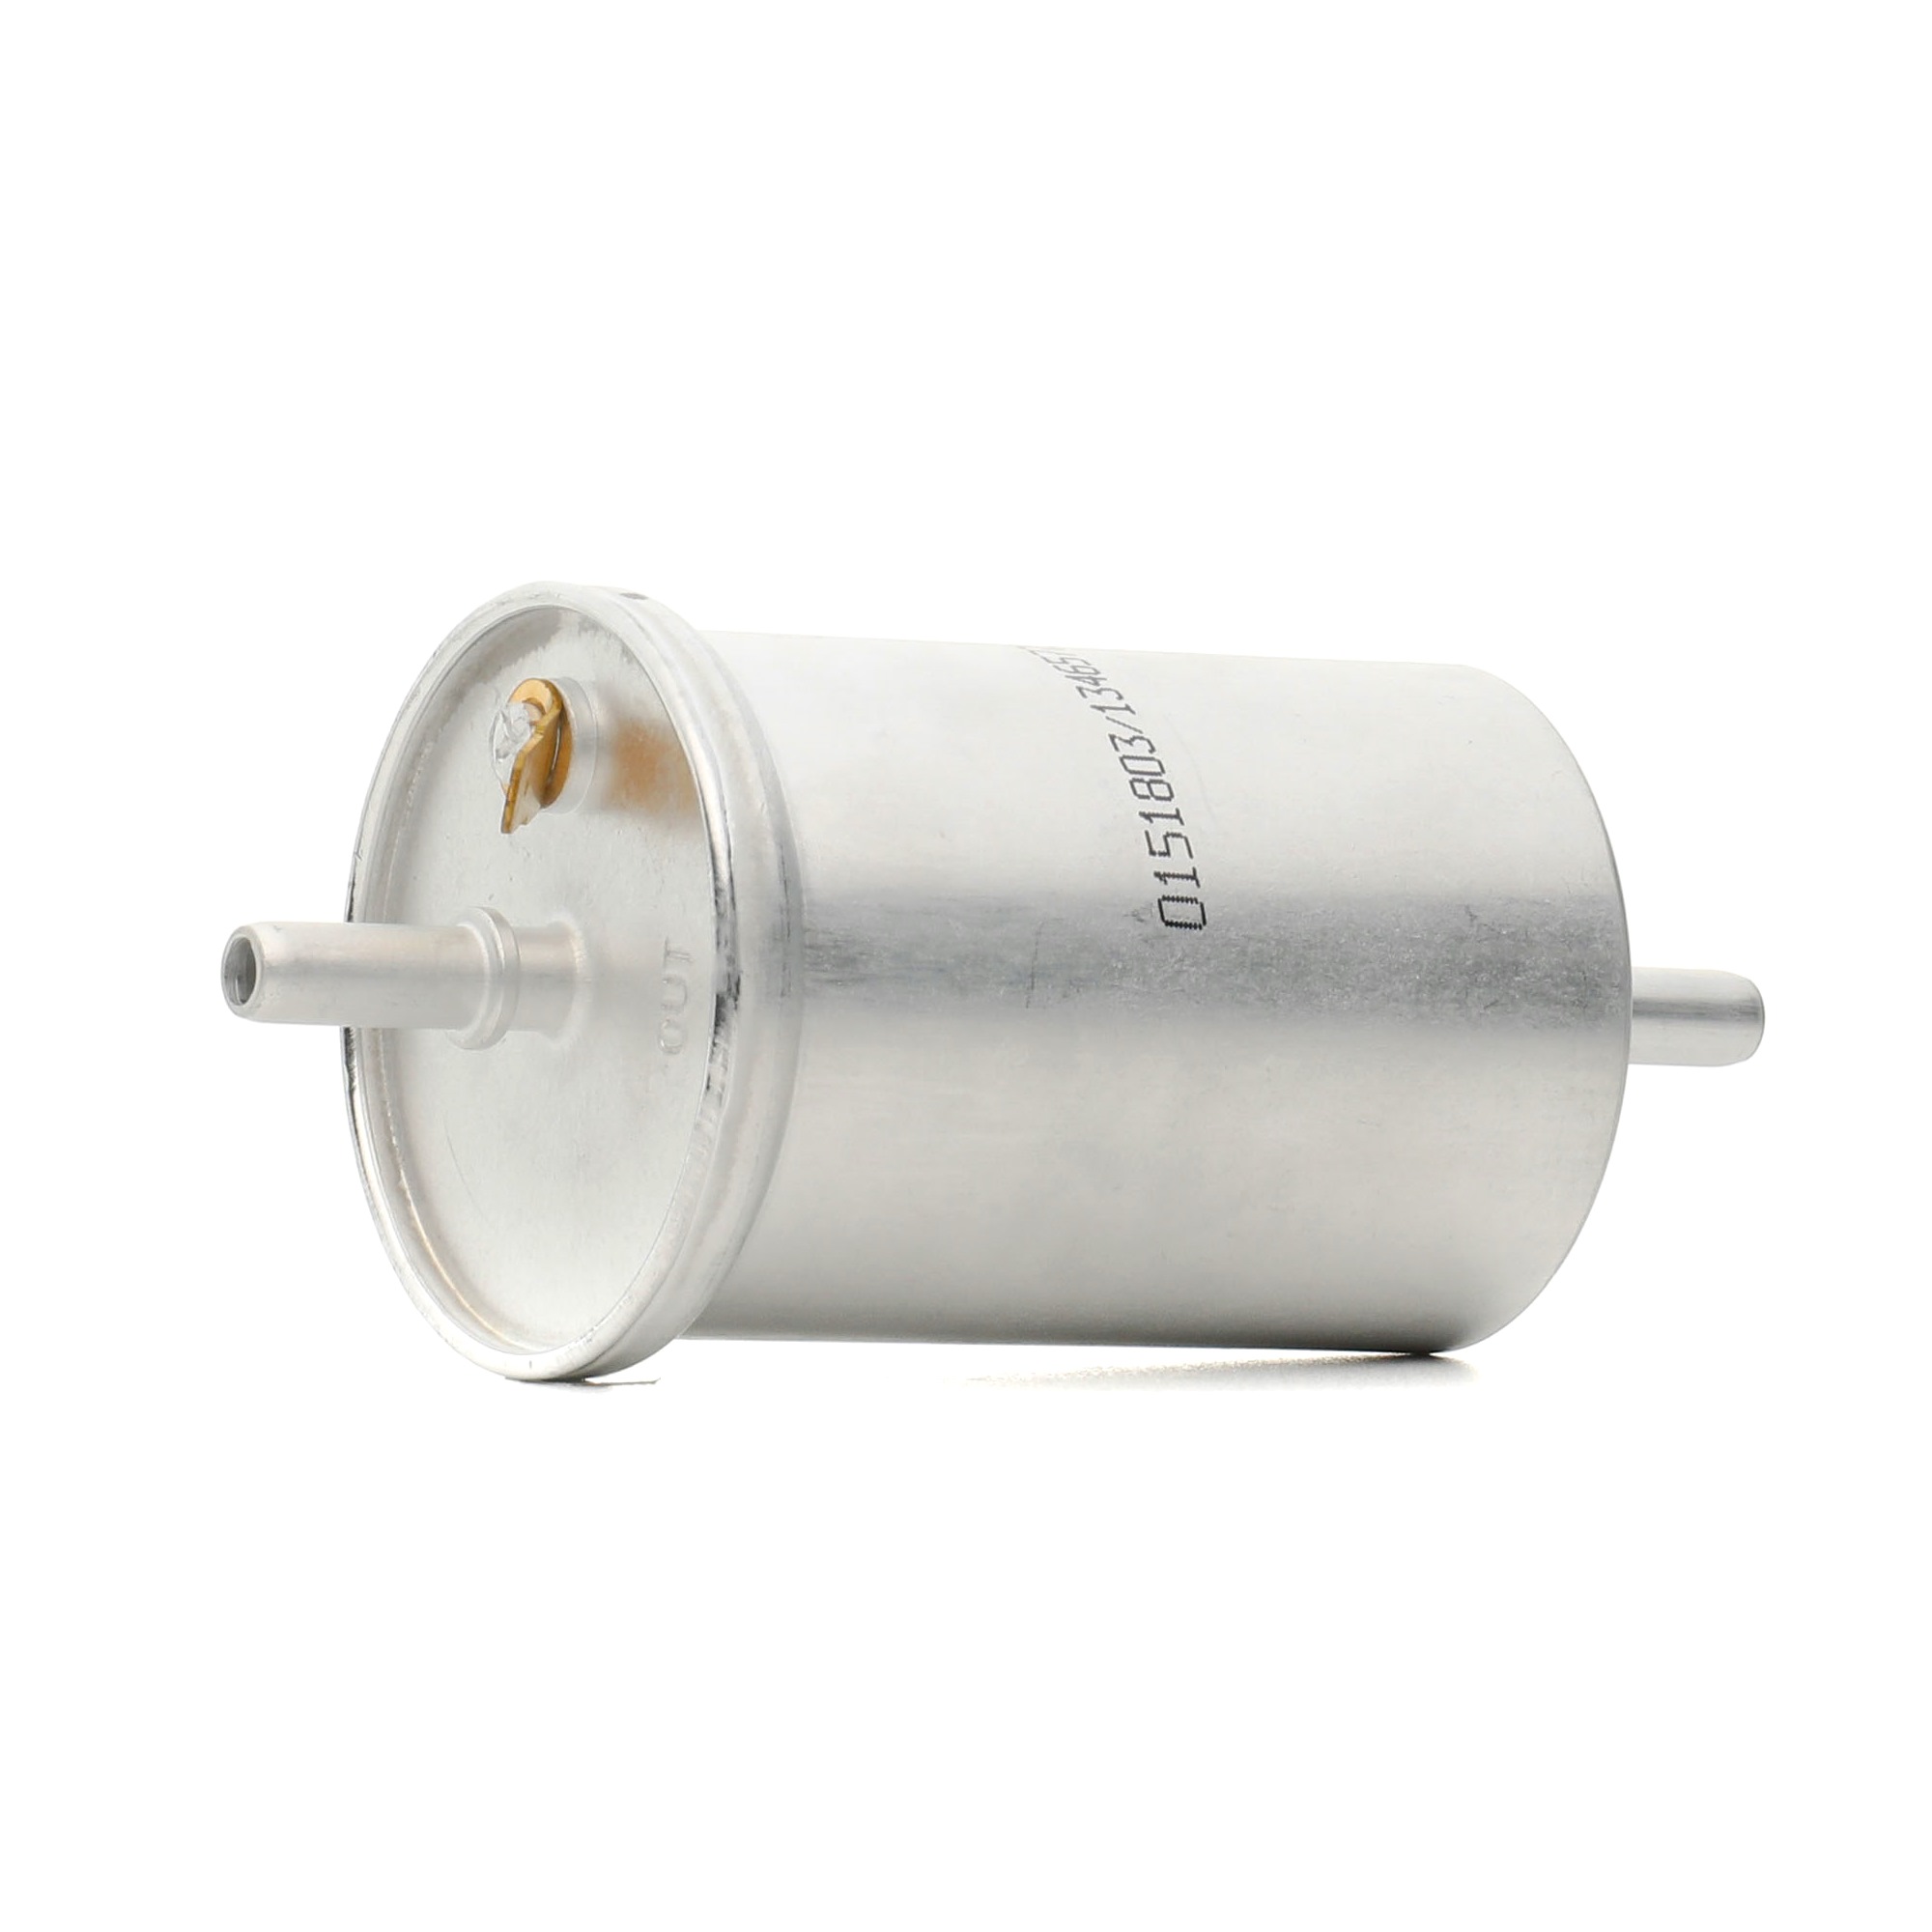 STARK SKFF-0870198 Fuel filter SMART experience and price